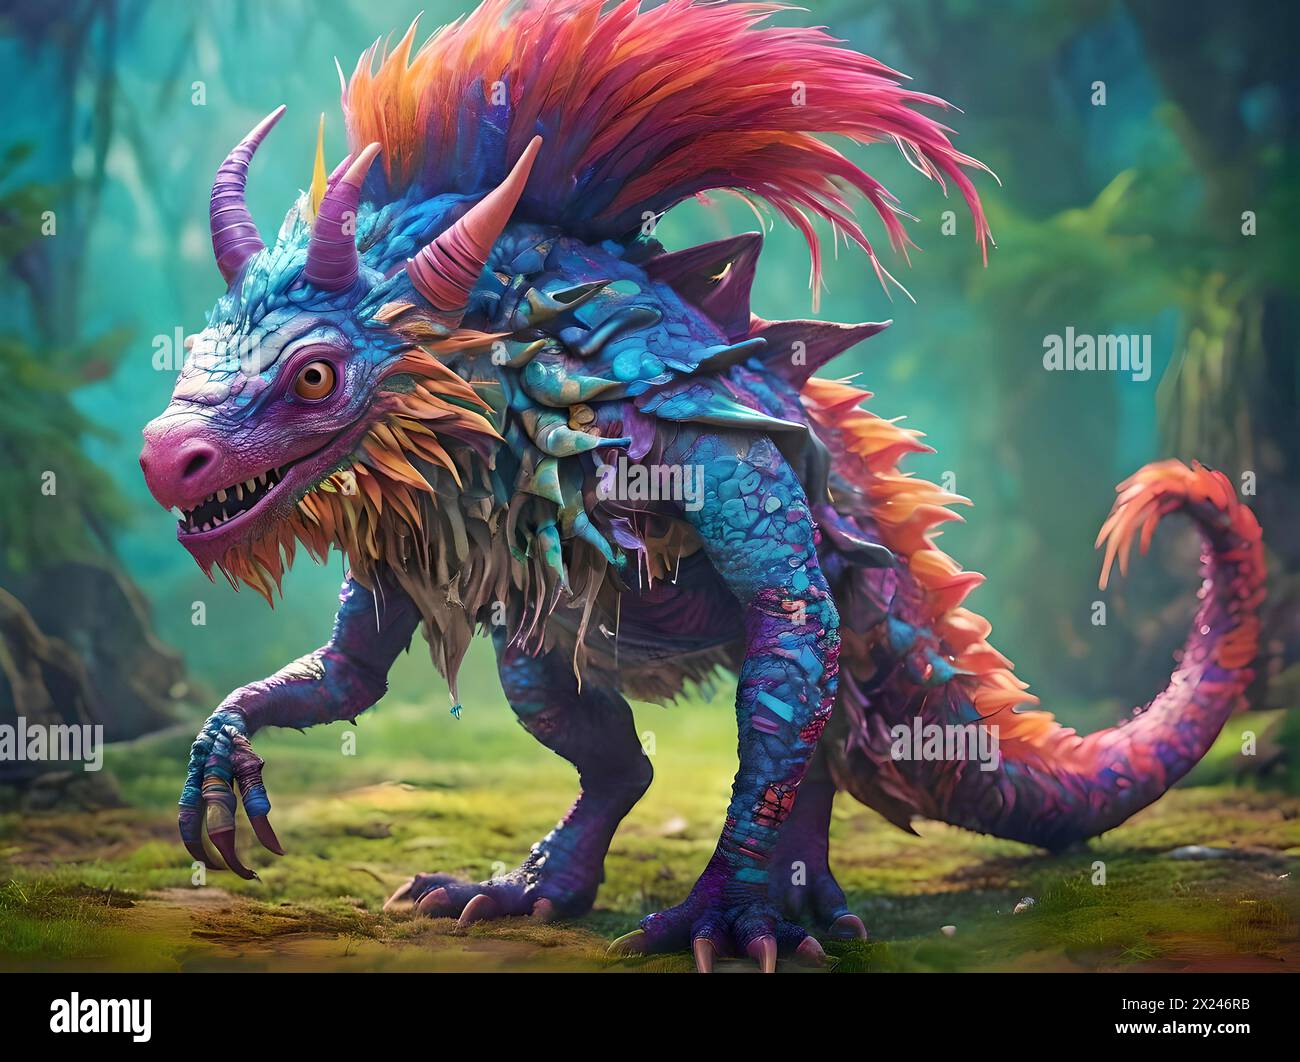 Whimsical and legendary monster, magical creature, fairy tale creature Stock Photo